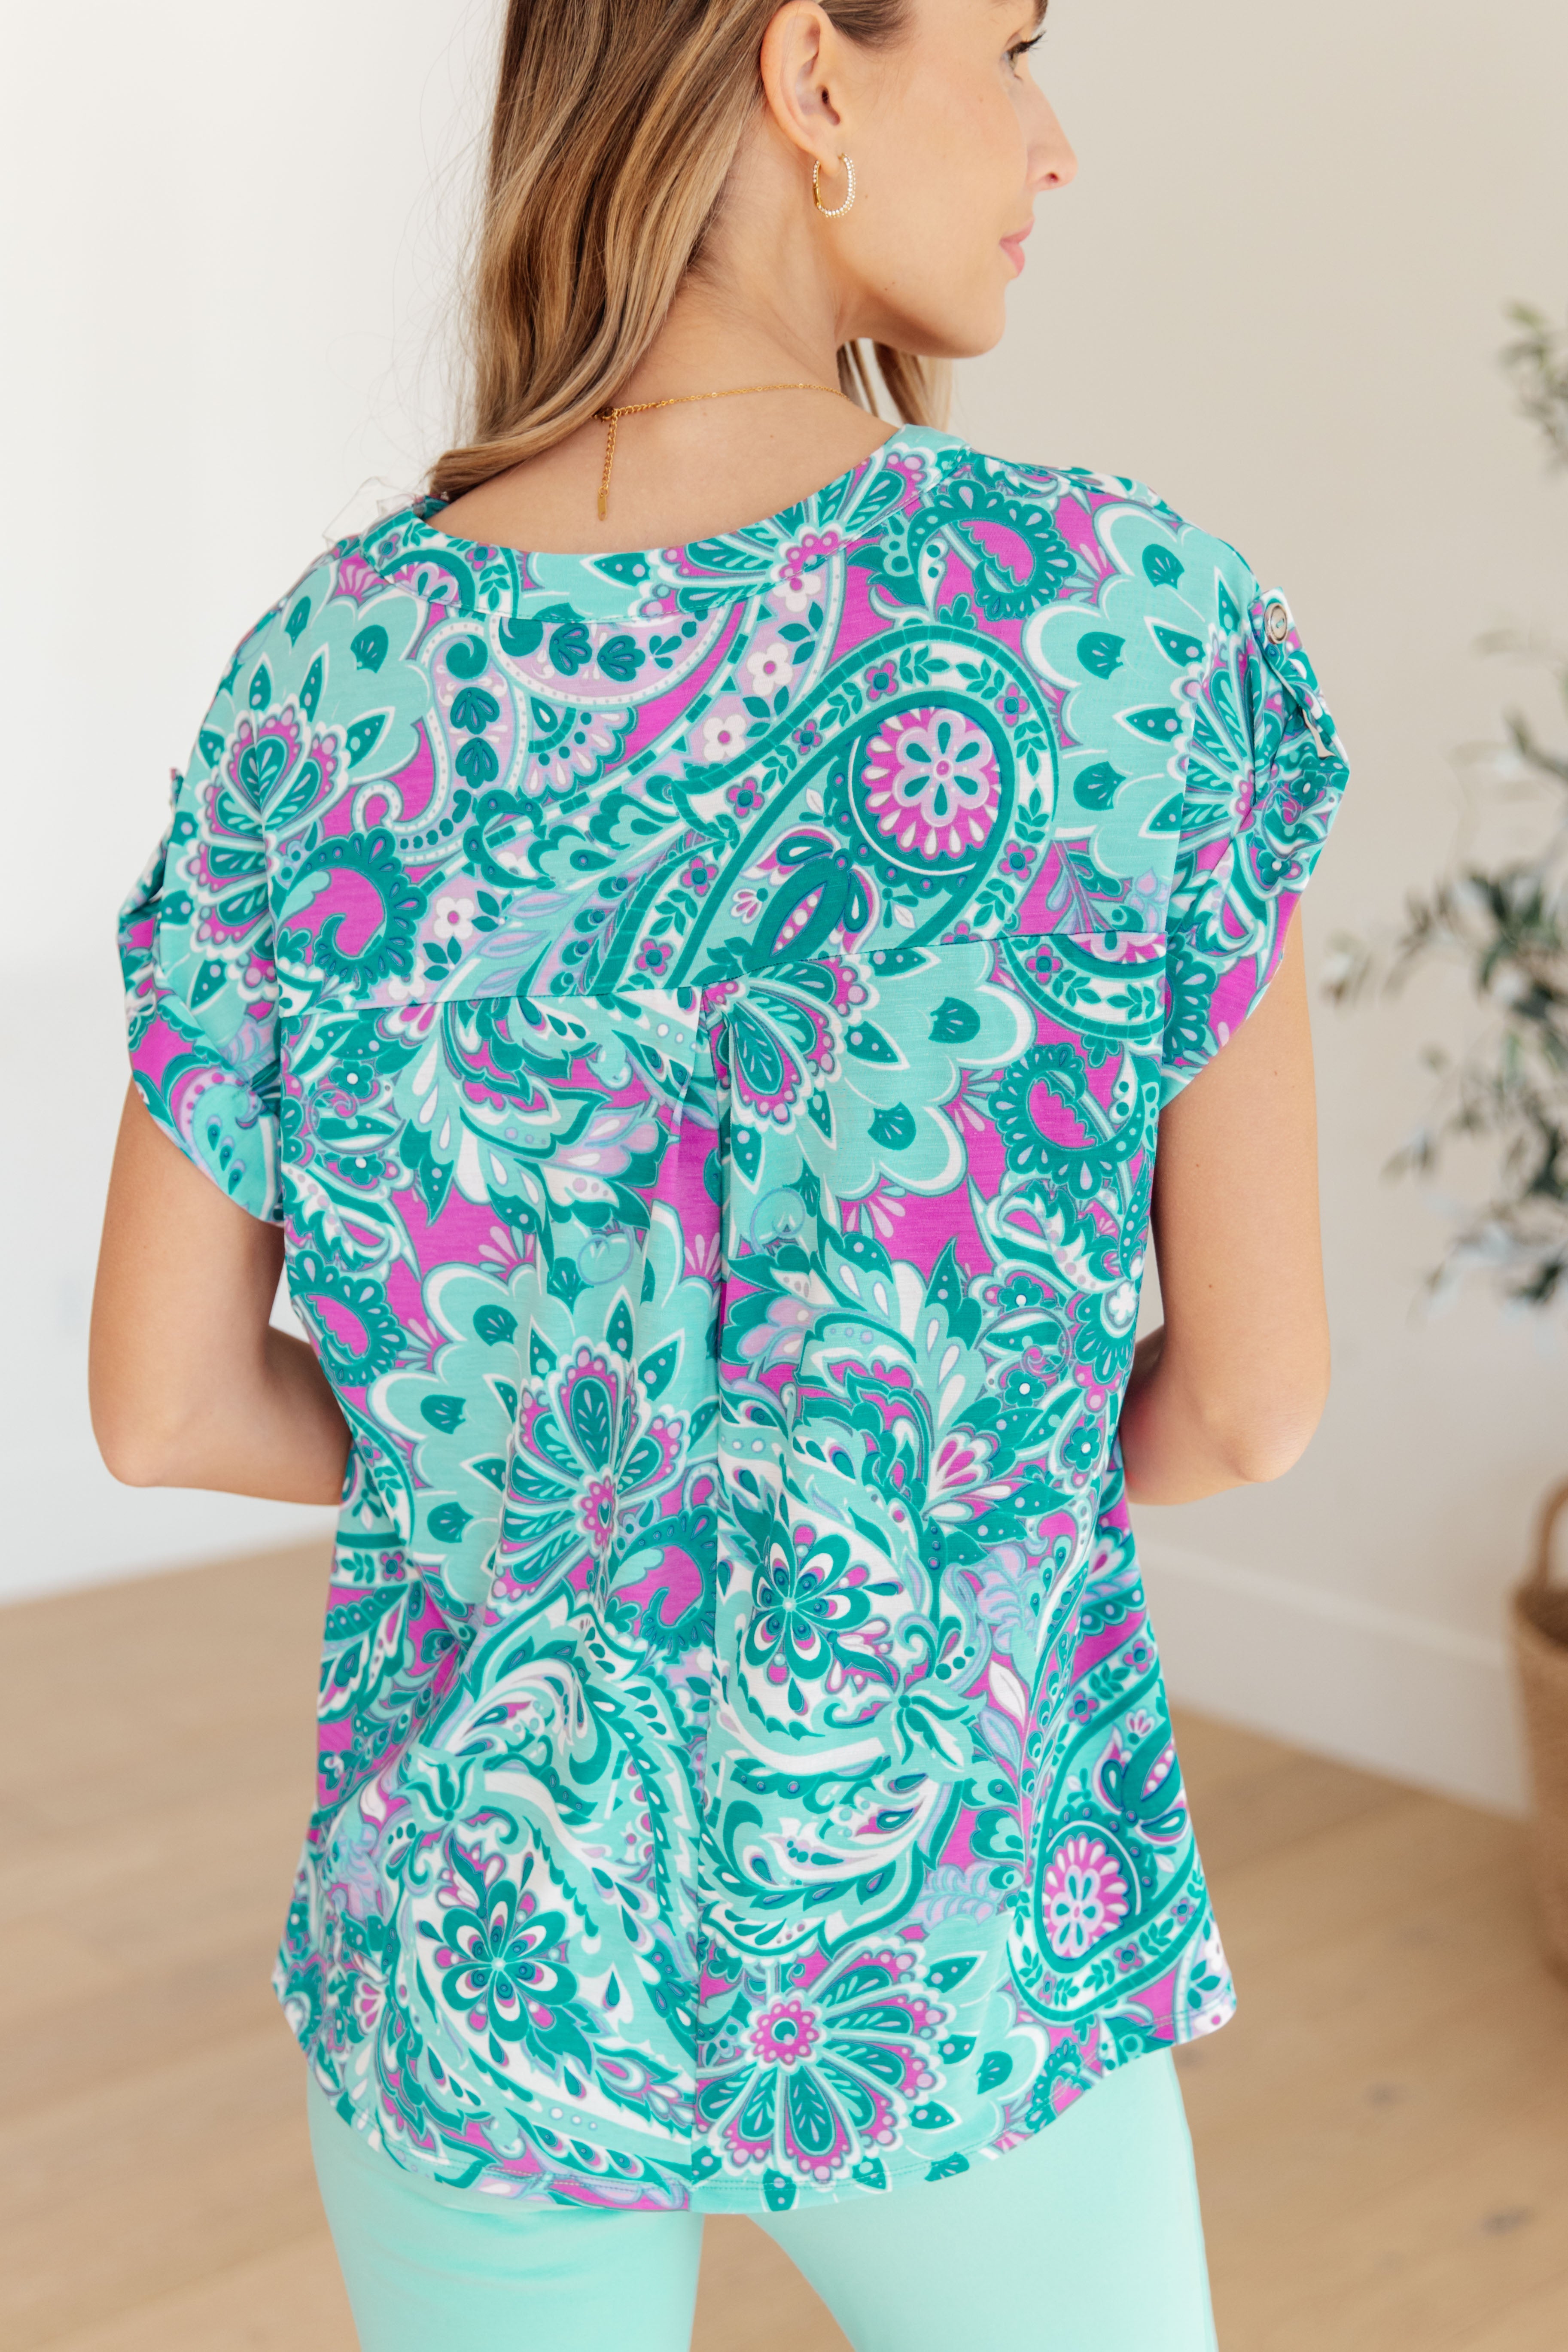 Dear Scarlett Lizzy Cap Sleeve Top in Magenta and Teal Paisley Ave Shops